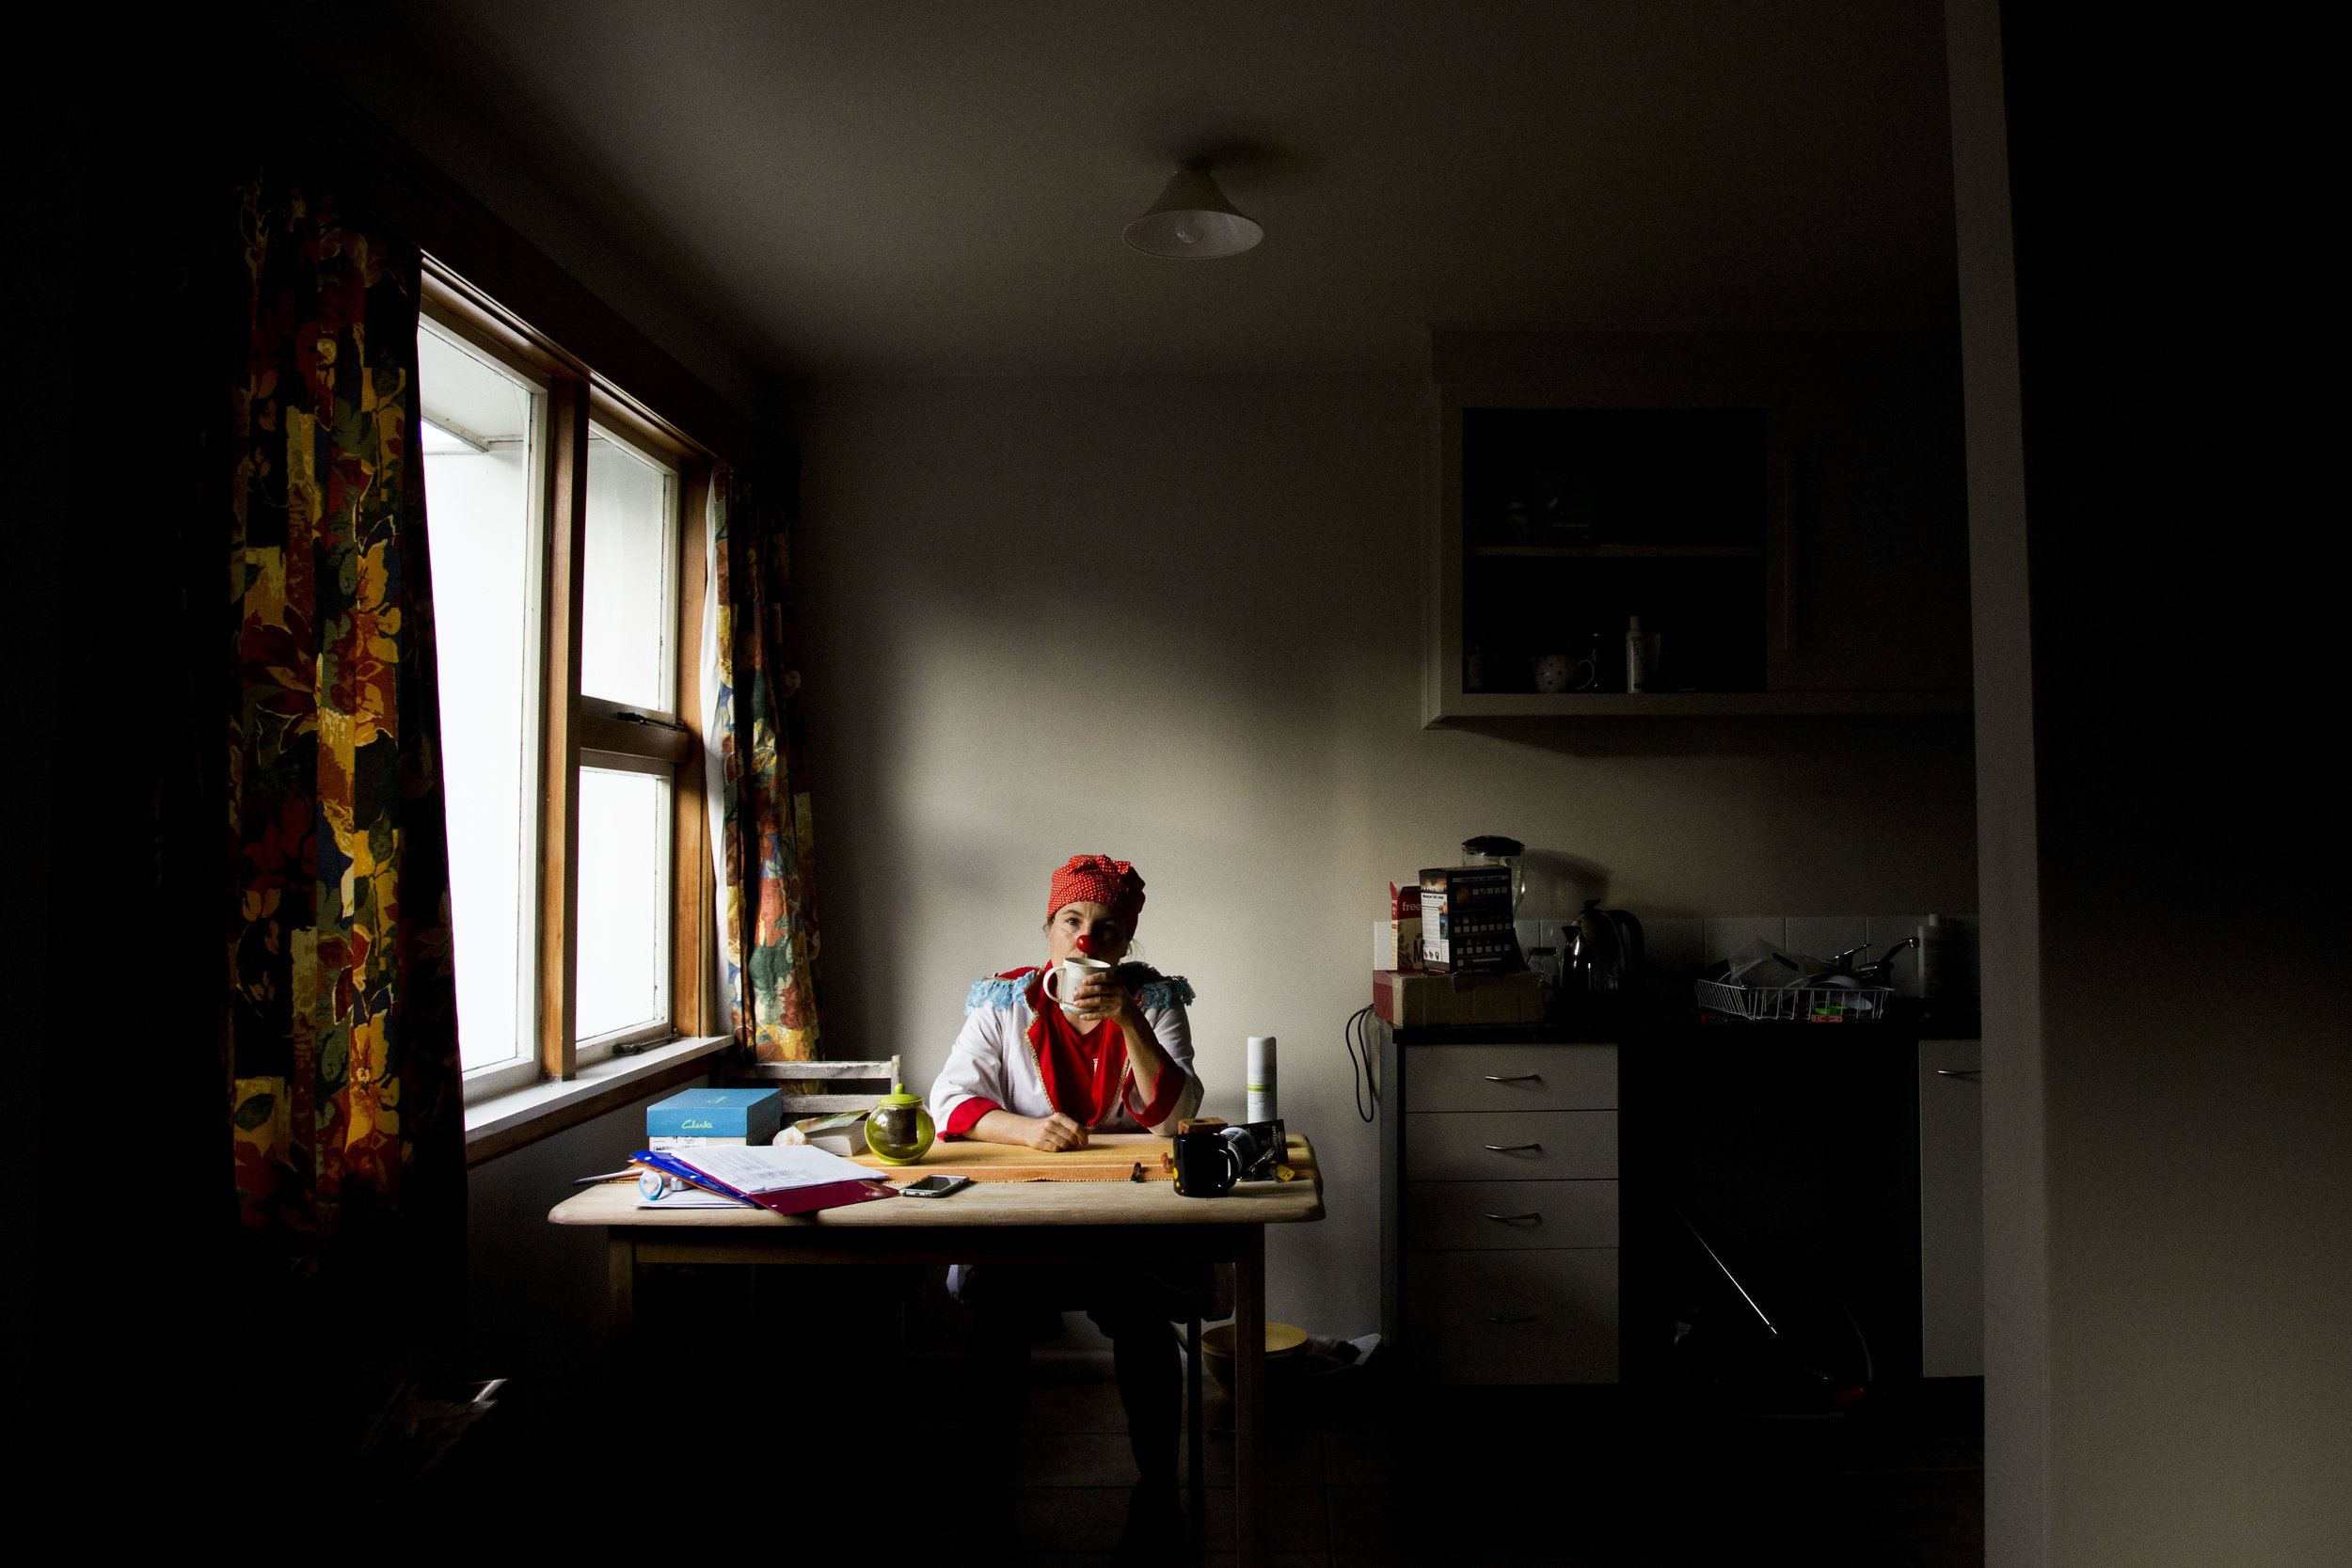  Ricken poses for a portrait in her Christchurch, NZ home while wearing her Clown Doctor costume on May 3, 2016. "Through my line of work, I have the privilege of dealing with lightness. I don’t have to deal with destruction. Although it’s been extre